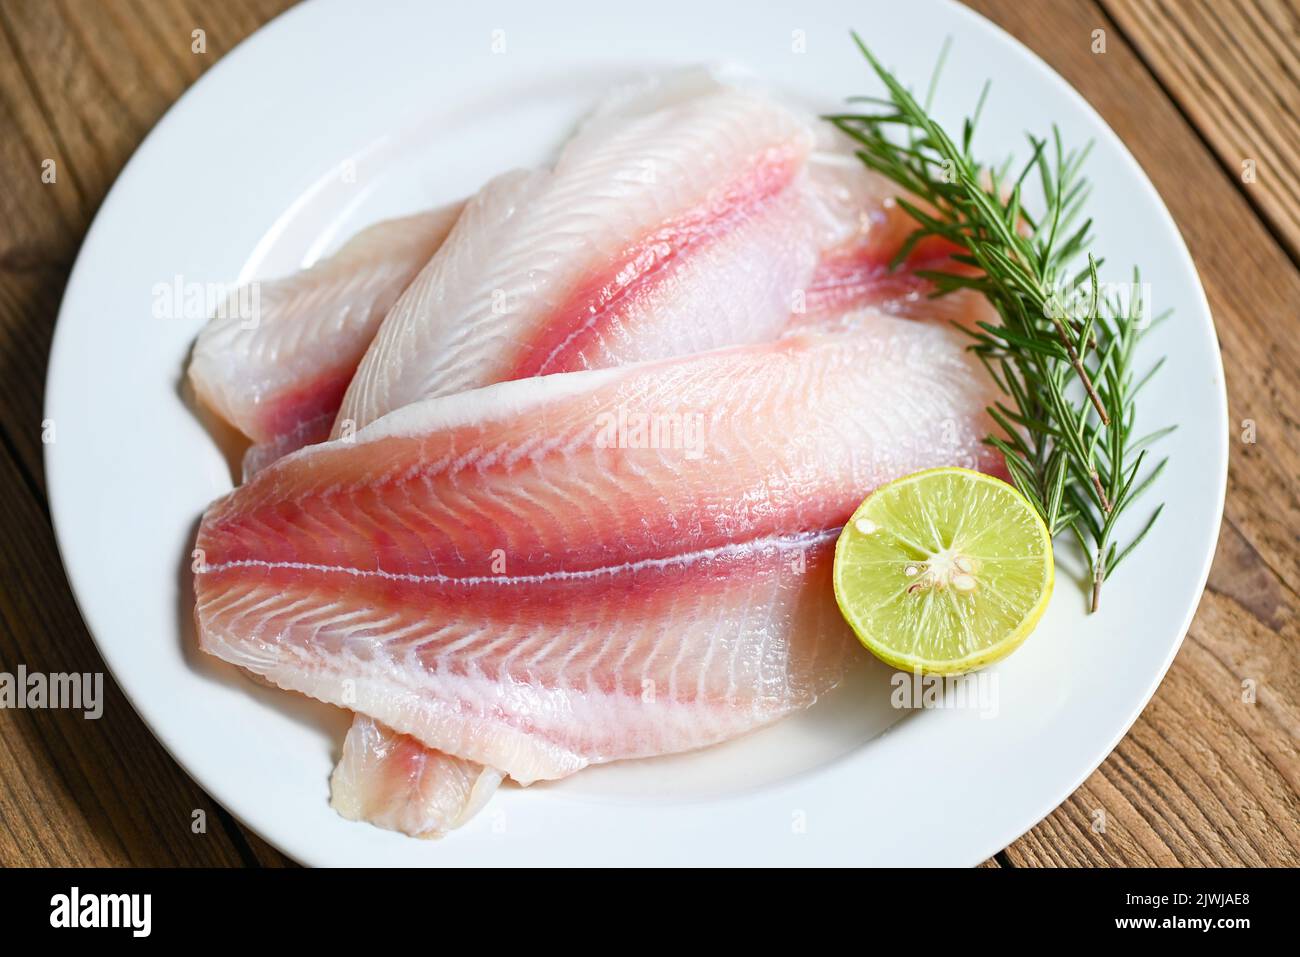 fish fillet on white plate with ingredients for cooking, fresh raw pangasius fish fillet with herb and spices lemon lime and rosemary, meat dolly fish Stock Photo